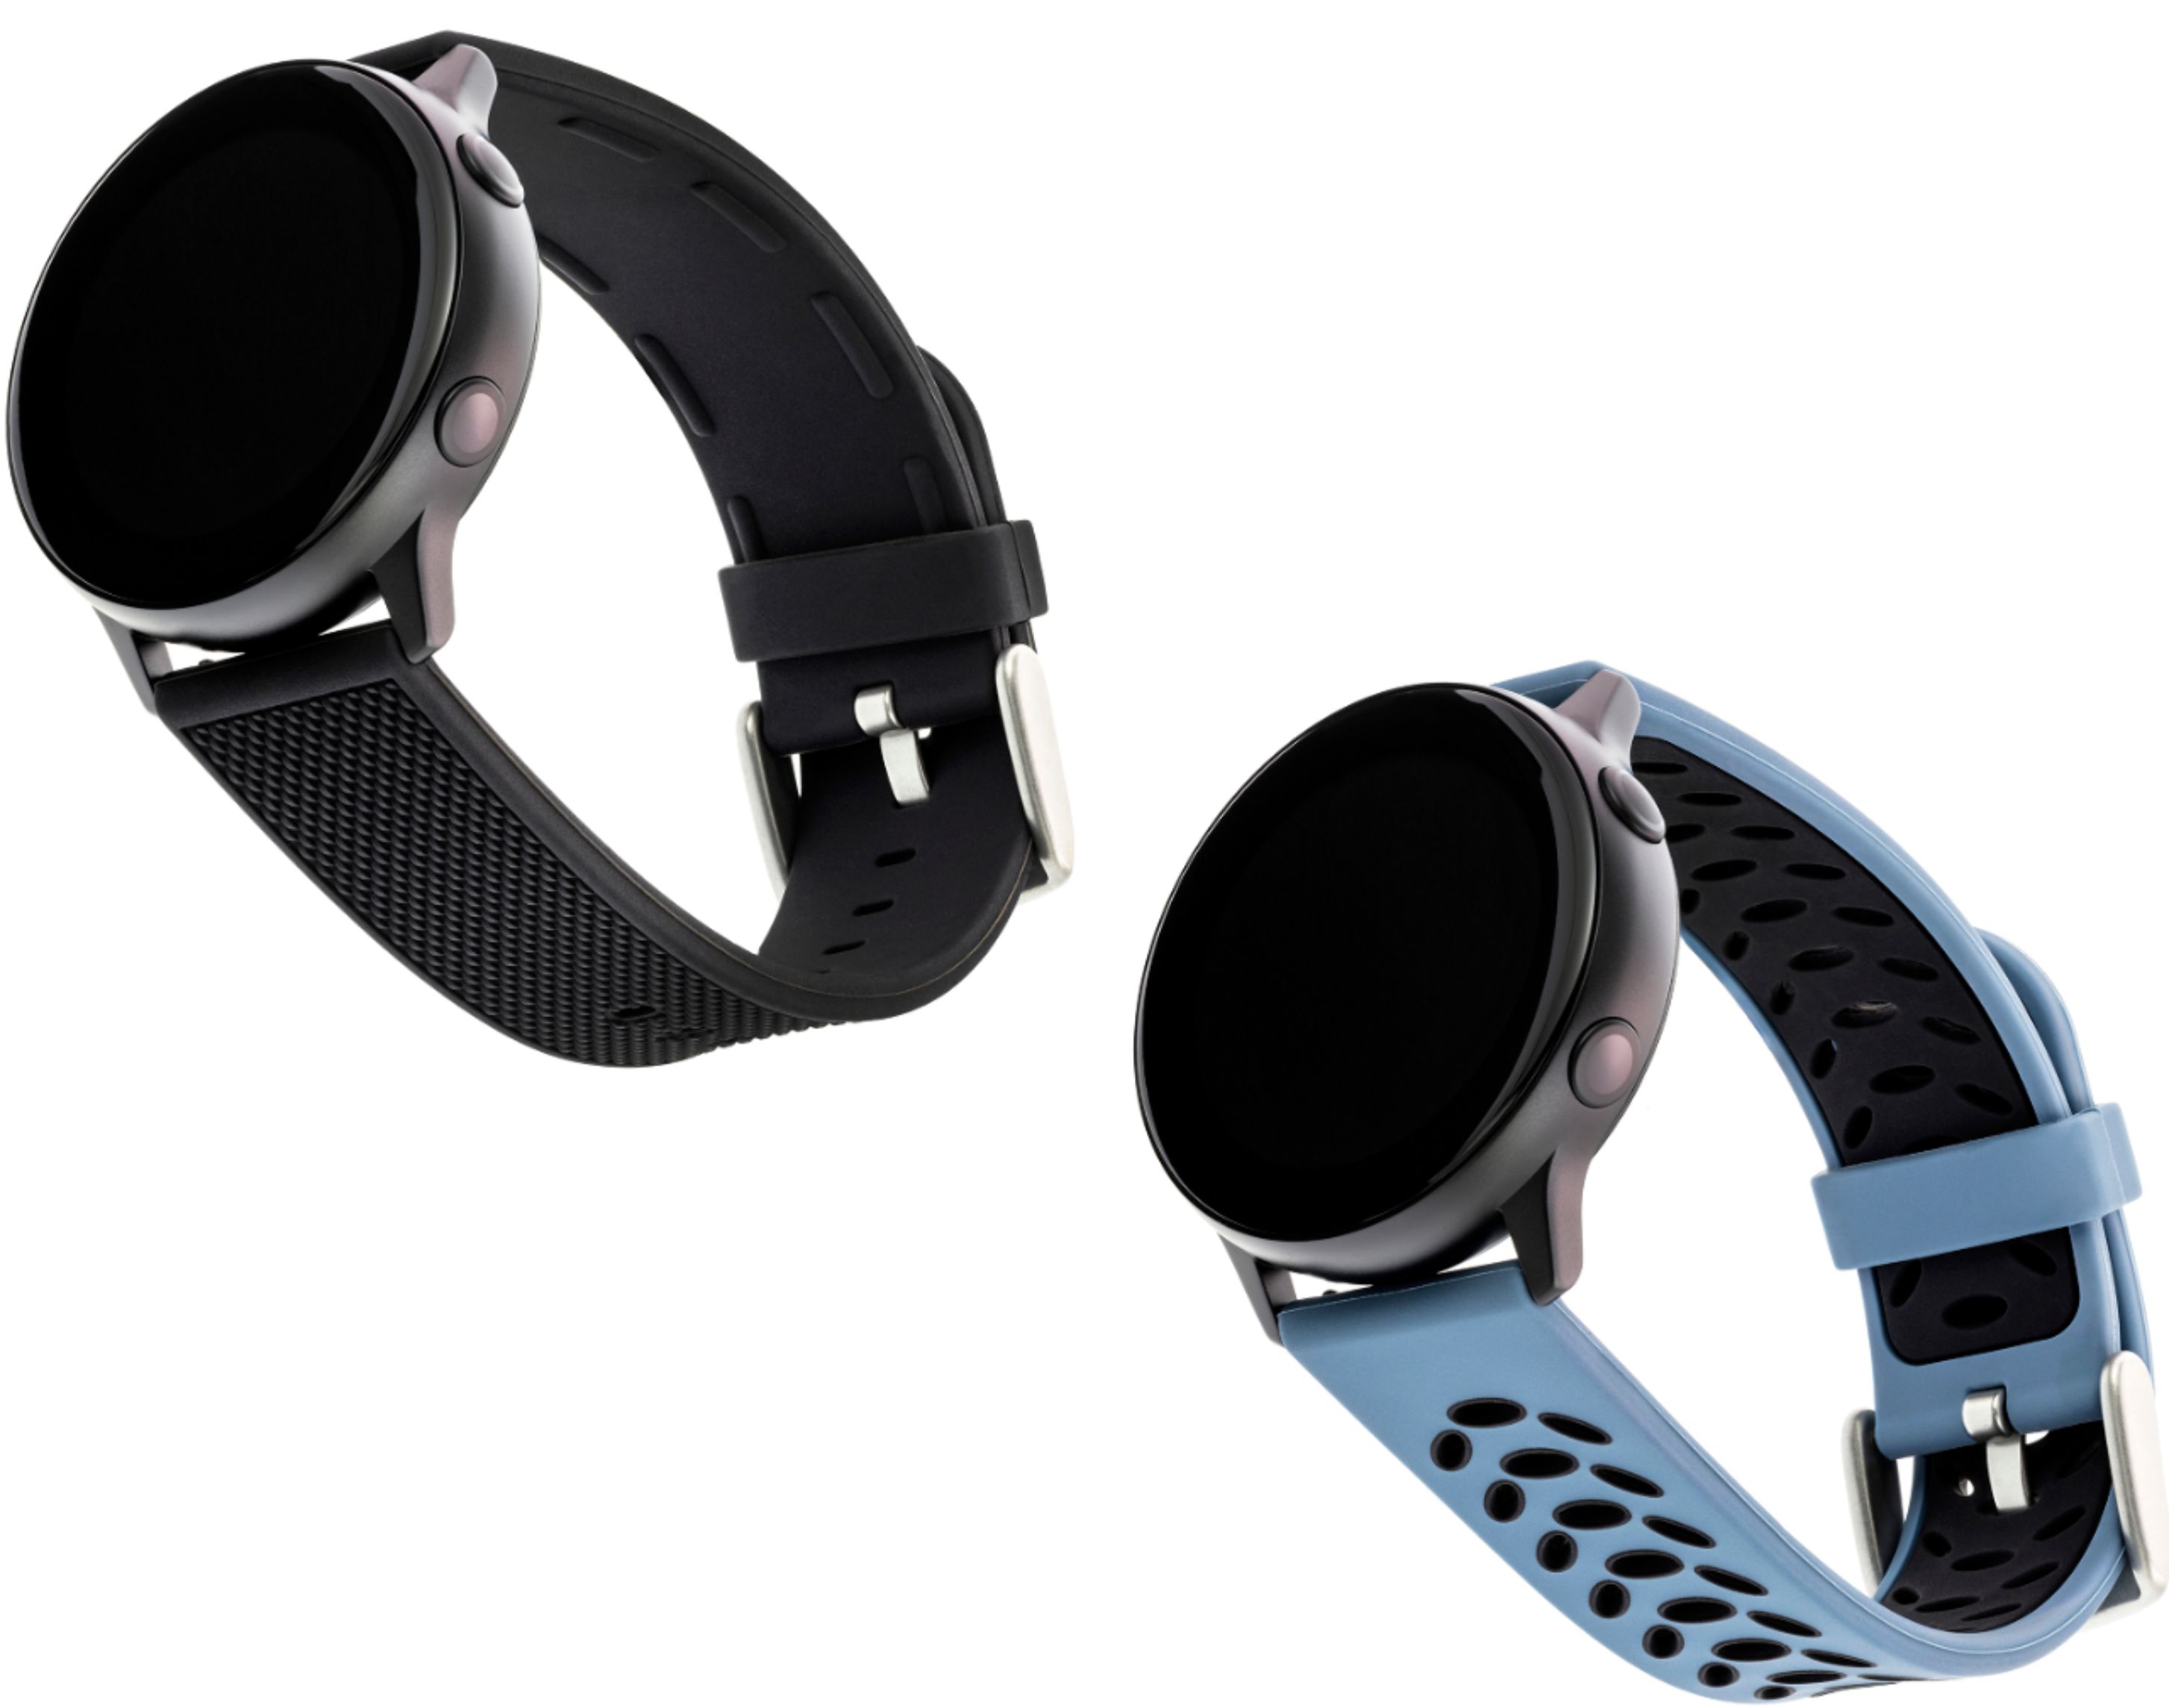  Obligatoryy Compatible with galaxy Active 2 Watch